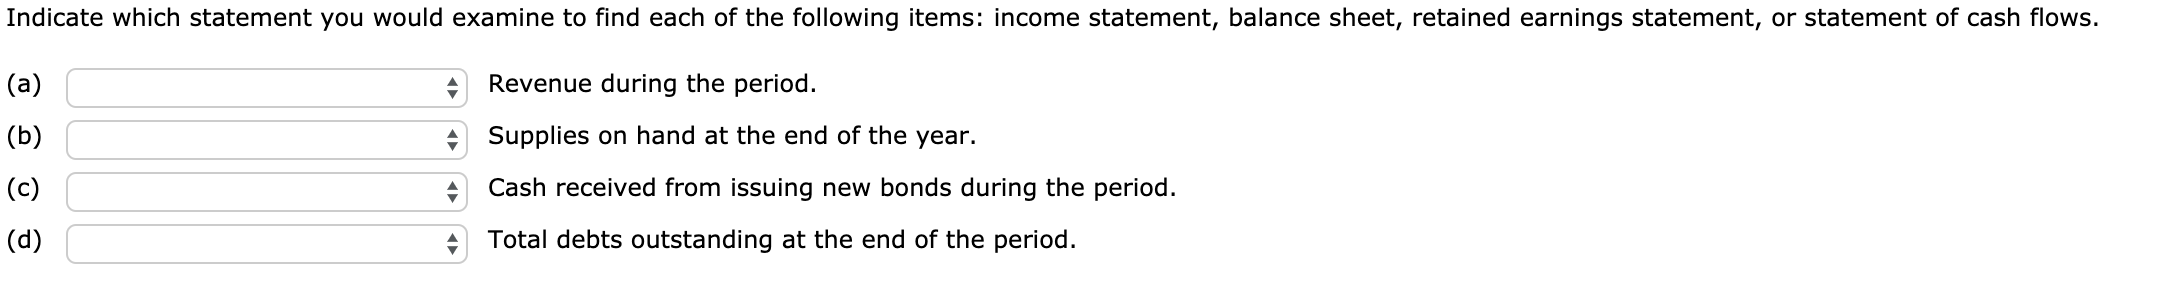 Indicate which statement you would examine to find each of the following items: income statement, balance sheet, retained earnings statement, or statement of cash flows.
Revenue during the period.
(a)
+ Supplies on hand at the end of the year.
(b)
(c)
Cash received from issuing new bonds during the period.
Total debts outstanding at the end of the period.
(d)
